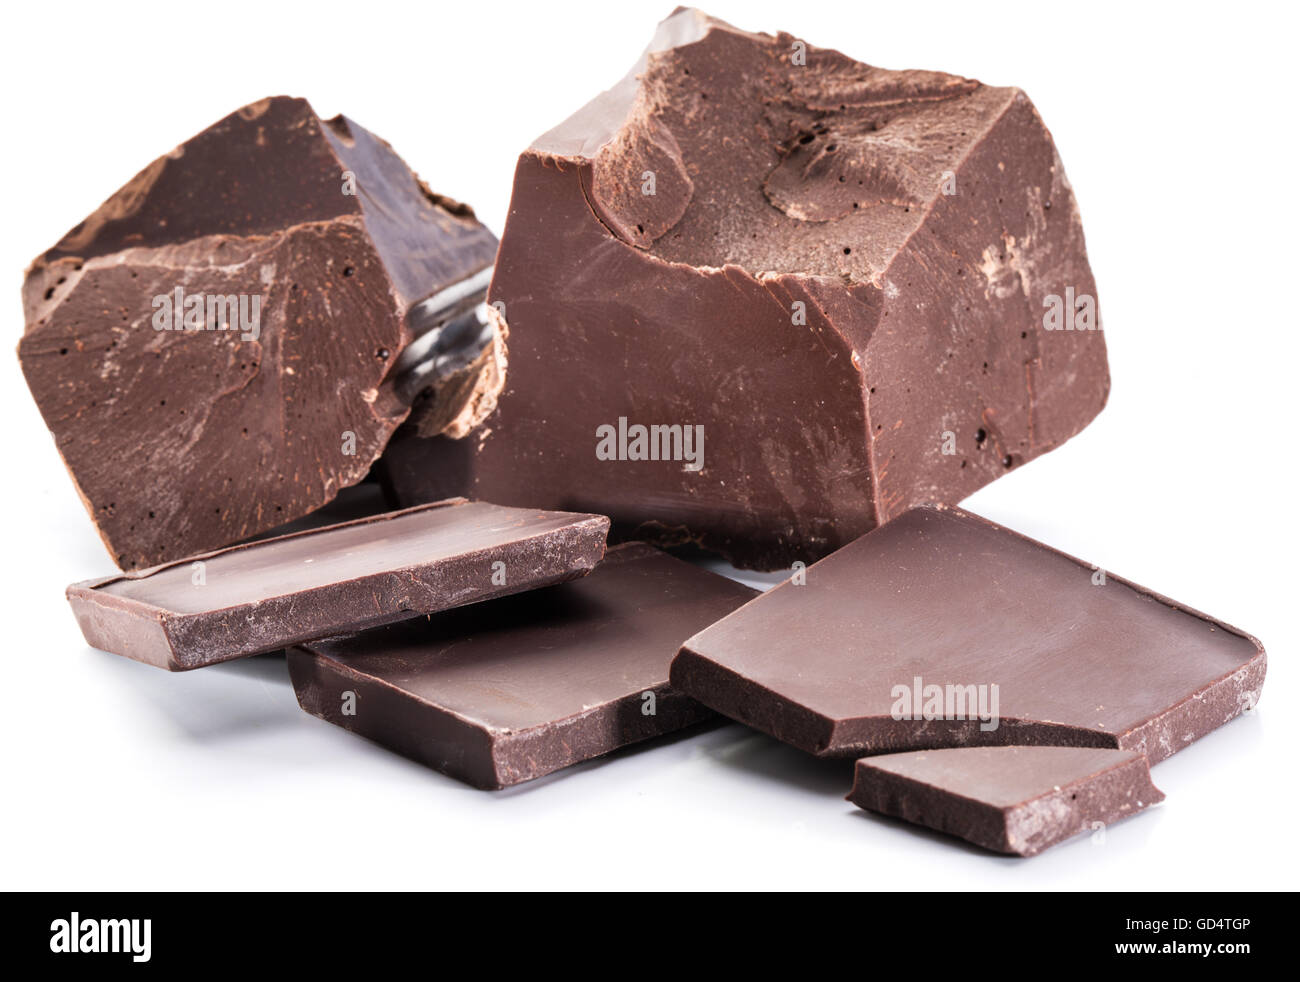 Chocolate blocks and pieces of chocolate bar isolated on a white background. Stock Photo